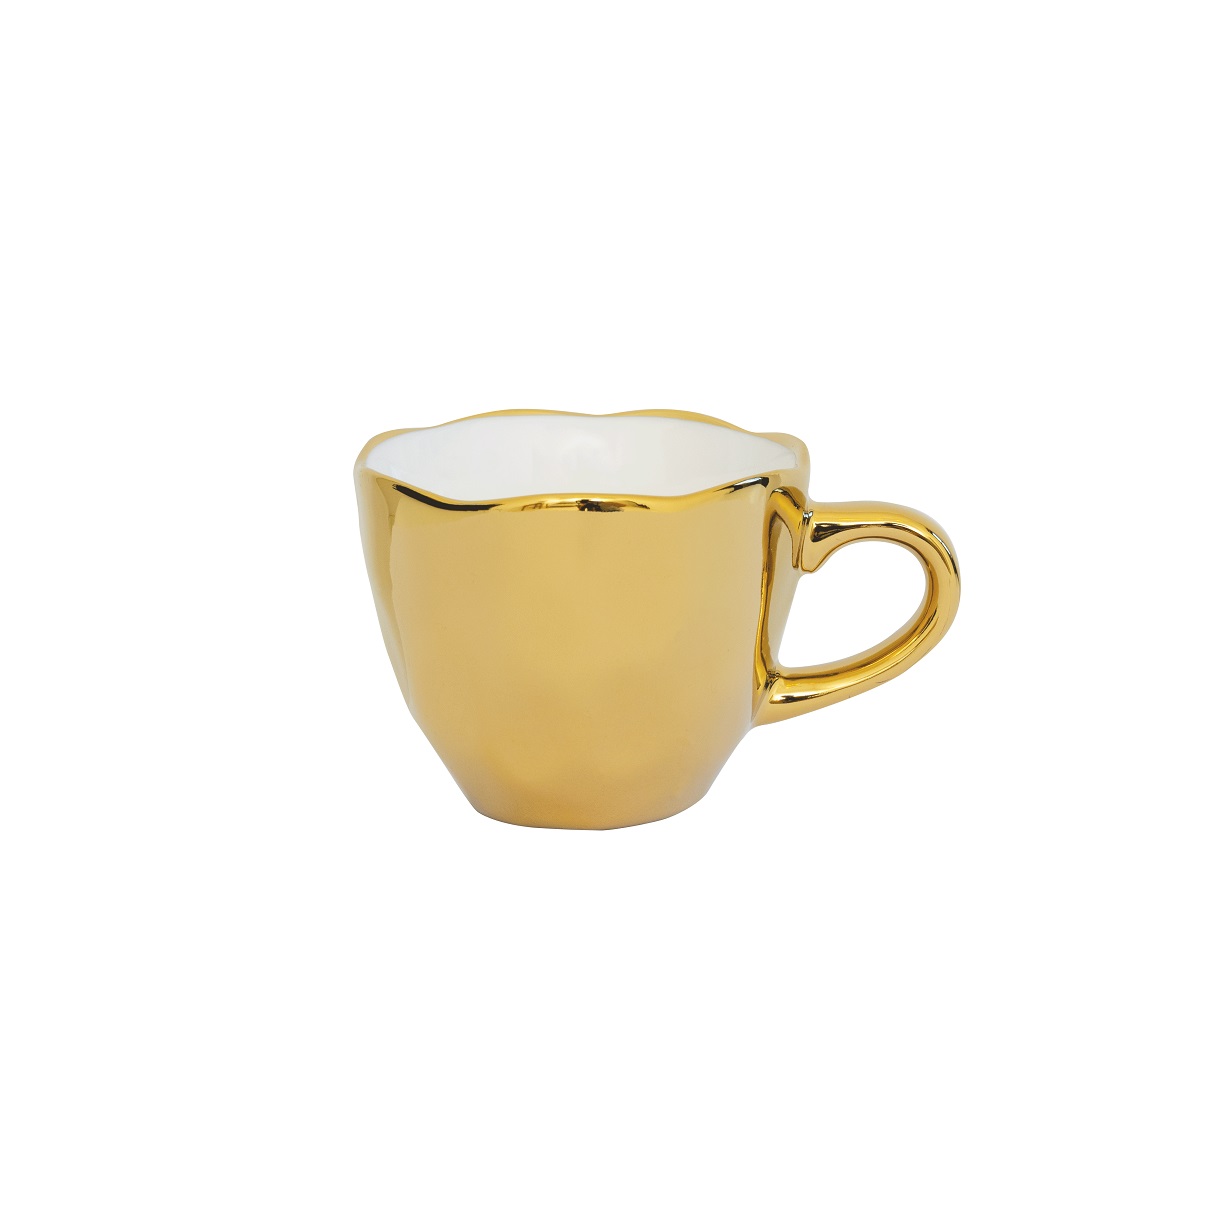 Unc Good Morning Cup Espresso Gold Gift